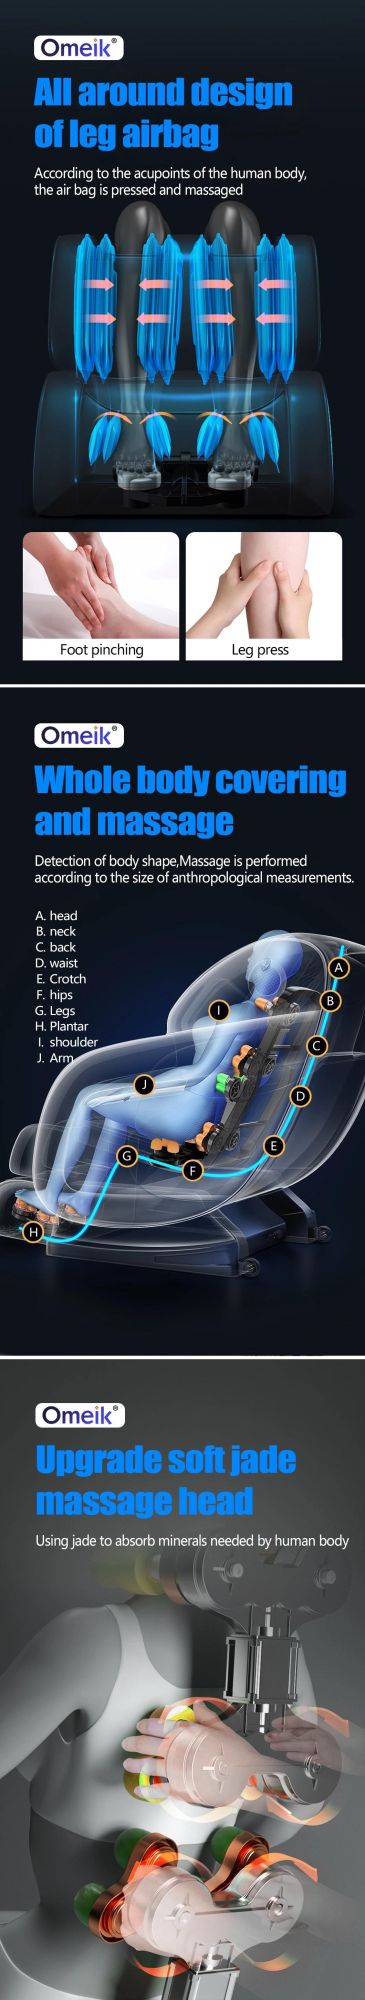 Electric Perfect Health Products 3D Full Body Airbags Massage Chair Sofa Armchair Massage